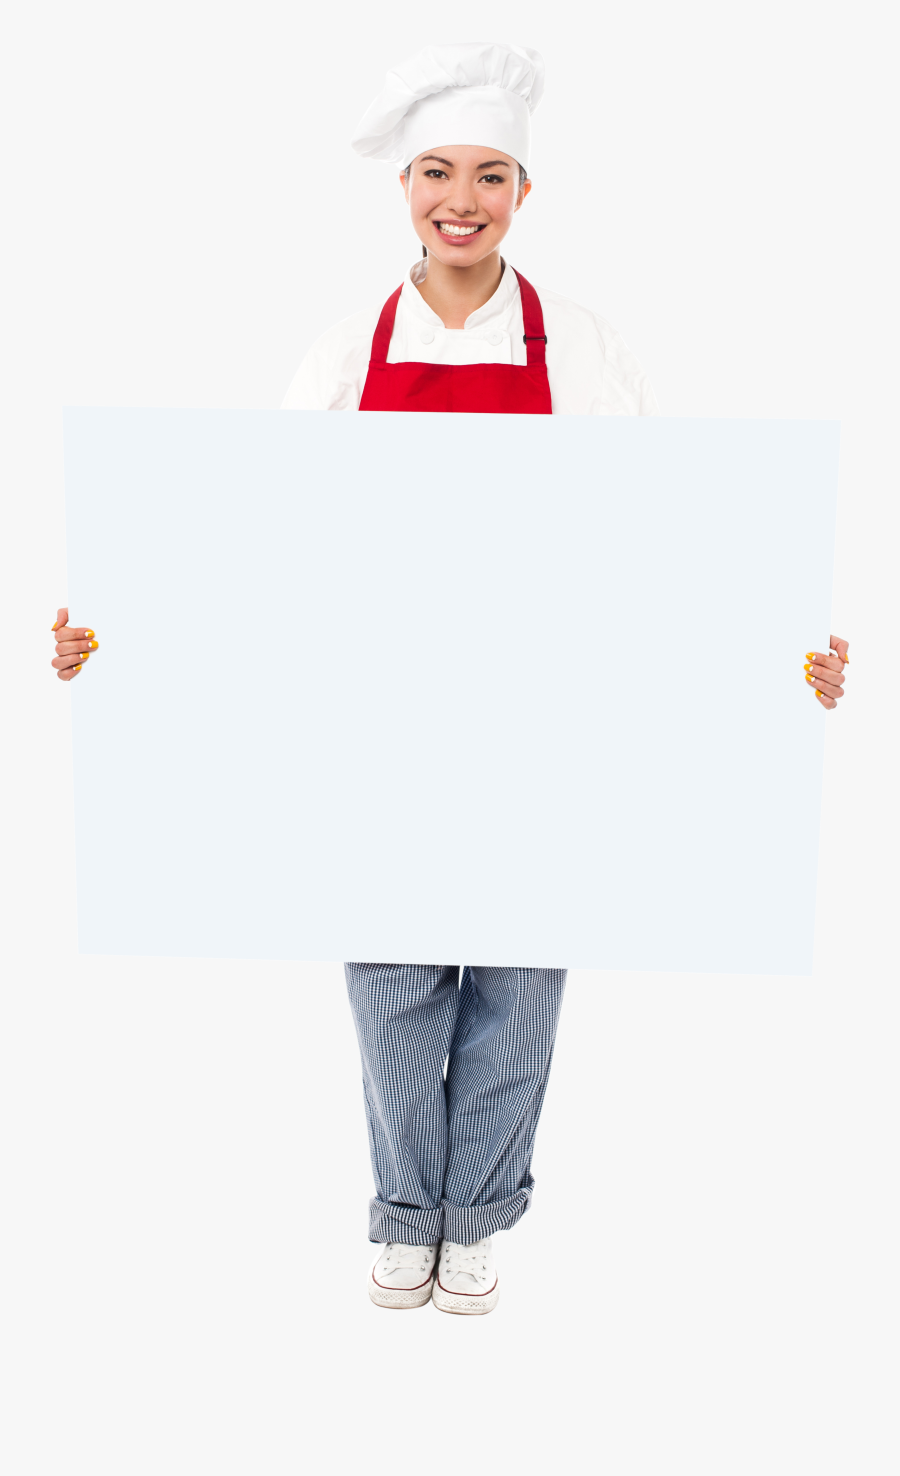 Chef Holding Banner Png Image - Chef Holding Banner Png, Transparent Clipart